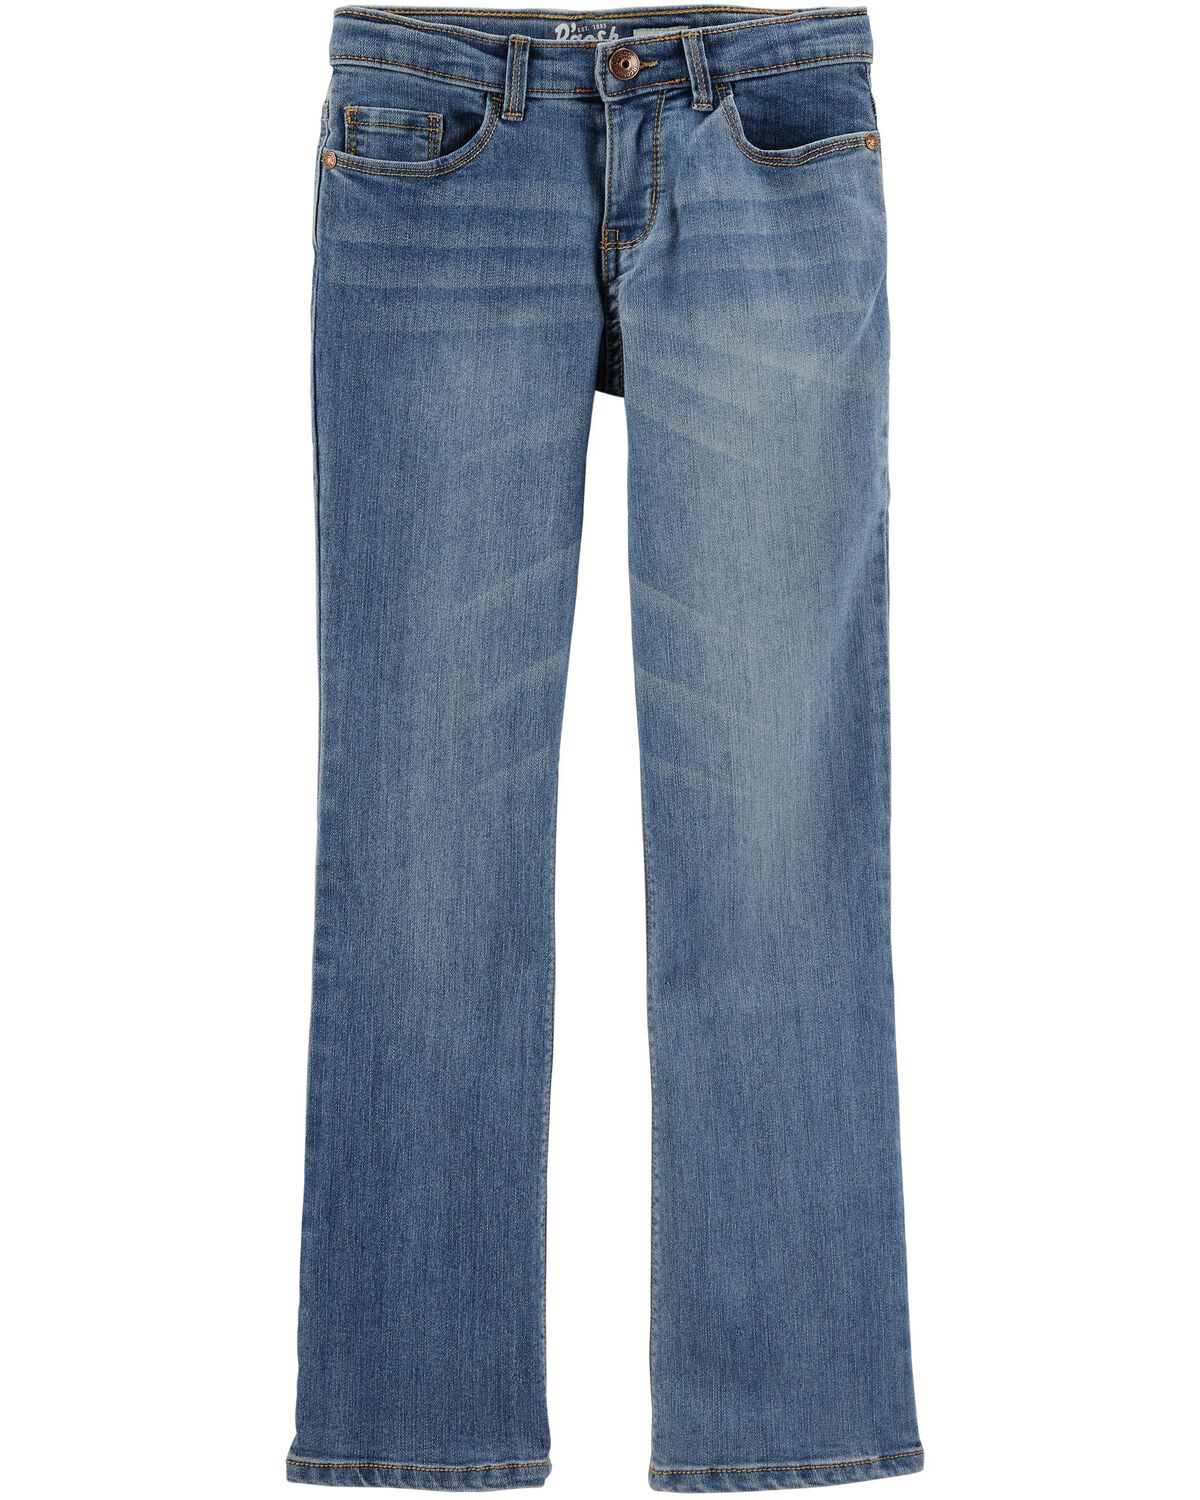 Boot Cut Upstate Blue Wash Jeans